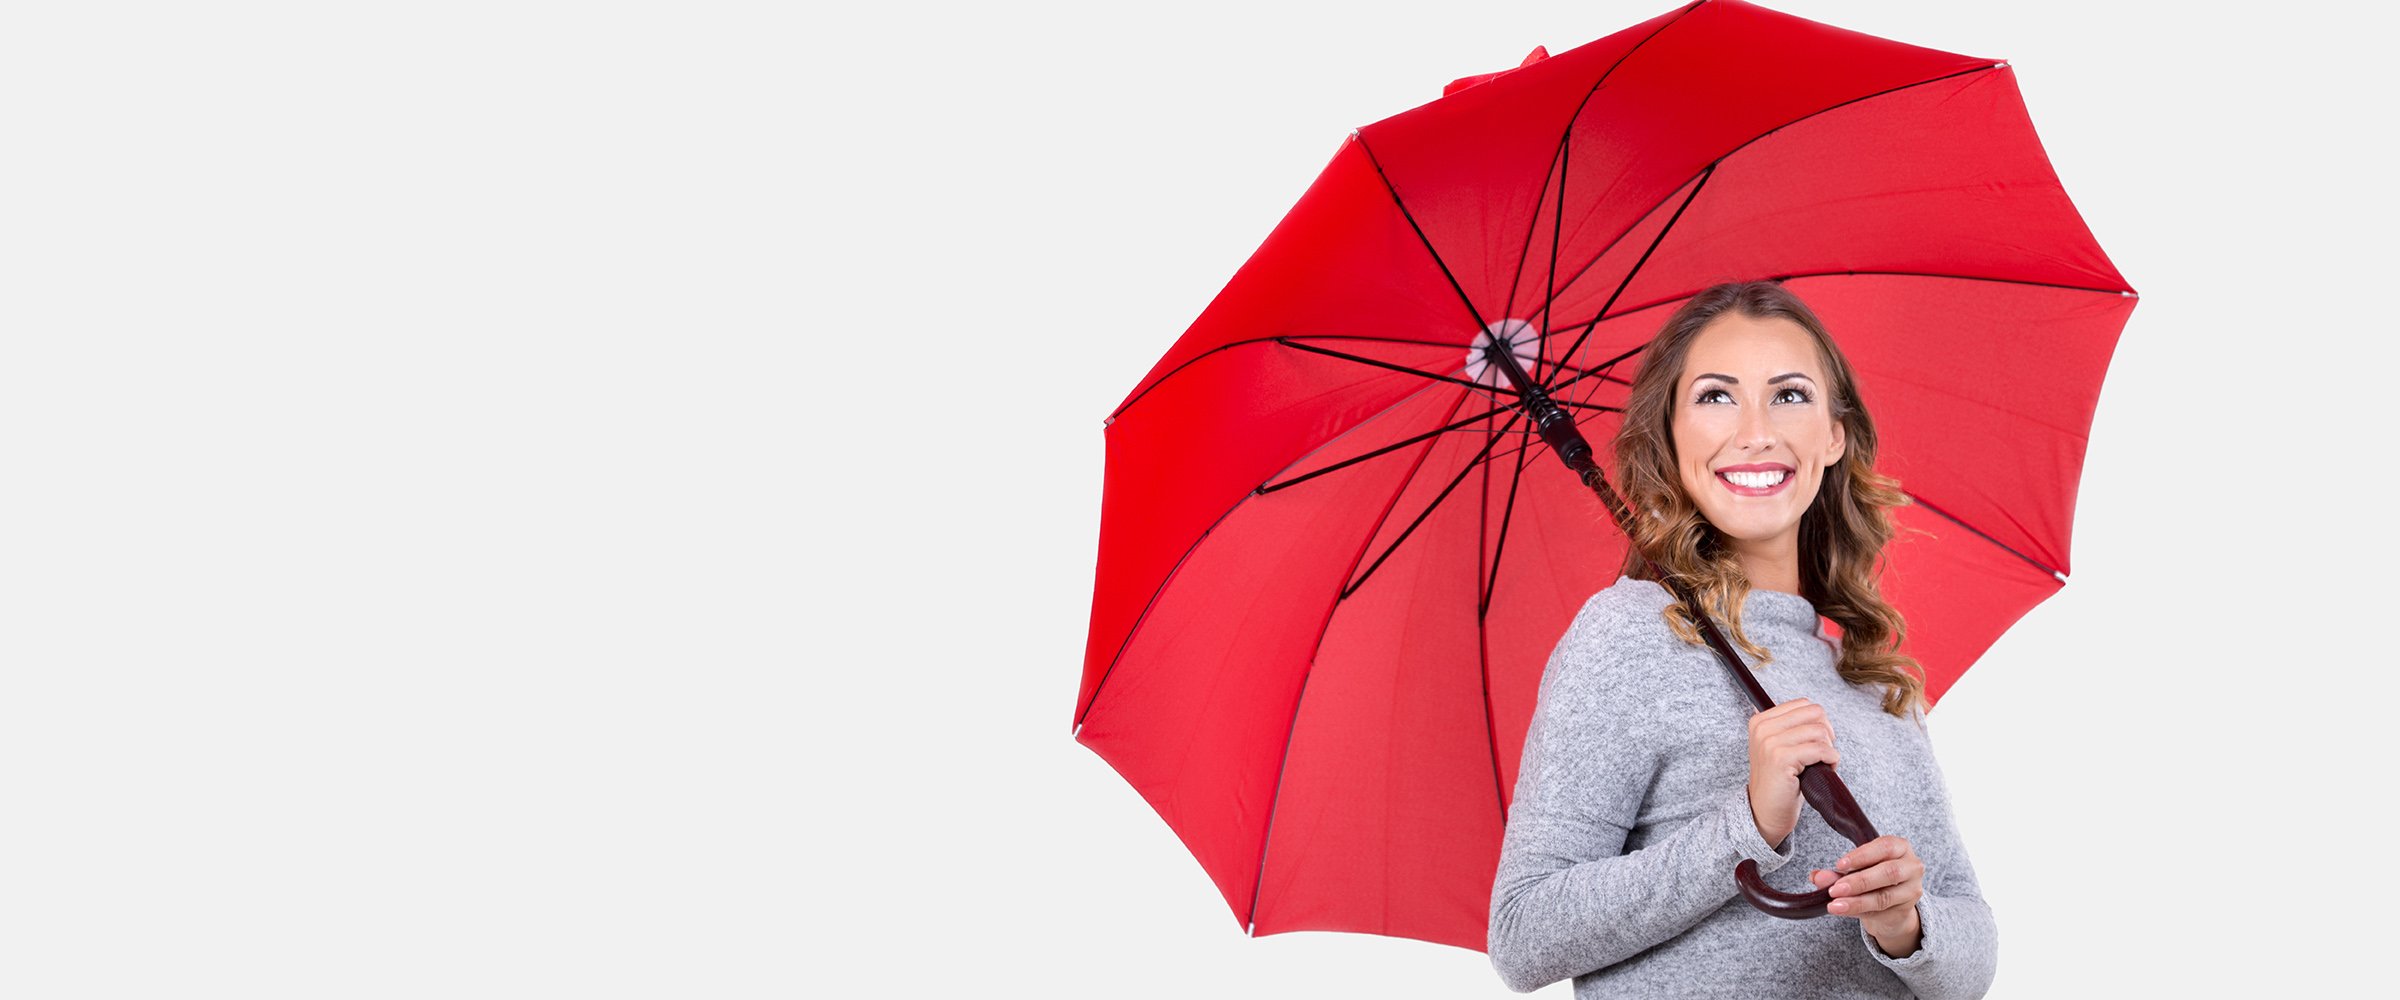 A picture of a woman holding an umbrella and smiling representing protection by a MidTenn Alarms security system